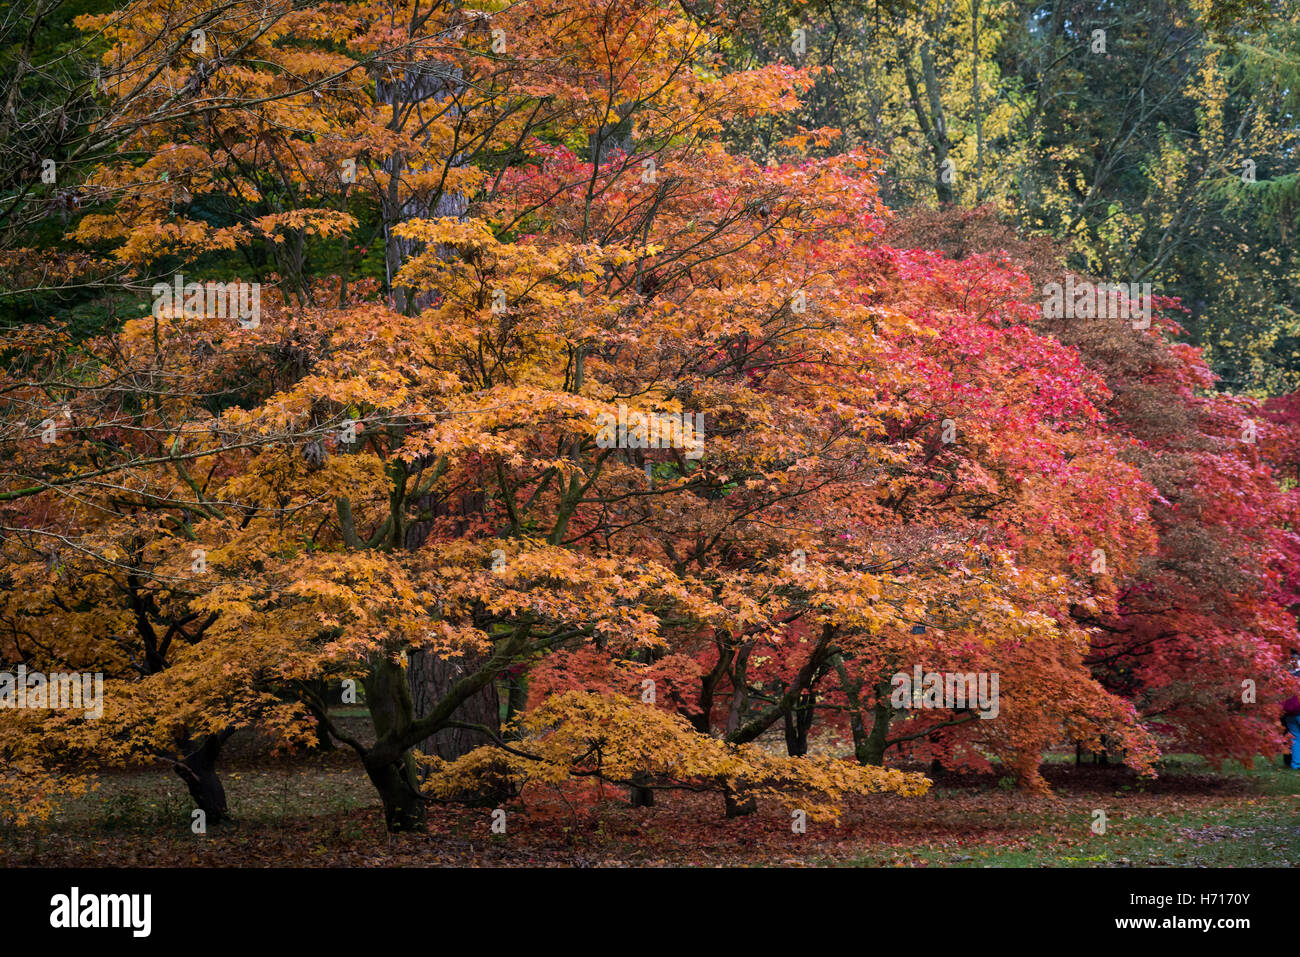 Autumn colours in Westonbirt, England, South east.  Range of warm colours from reds and orange tones through to brighter yellows. Stock Photo